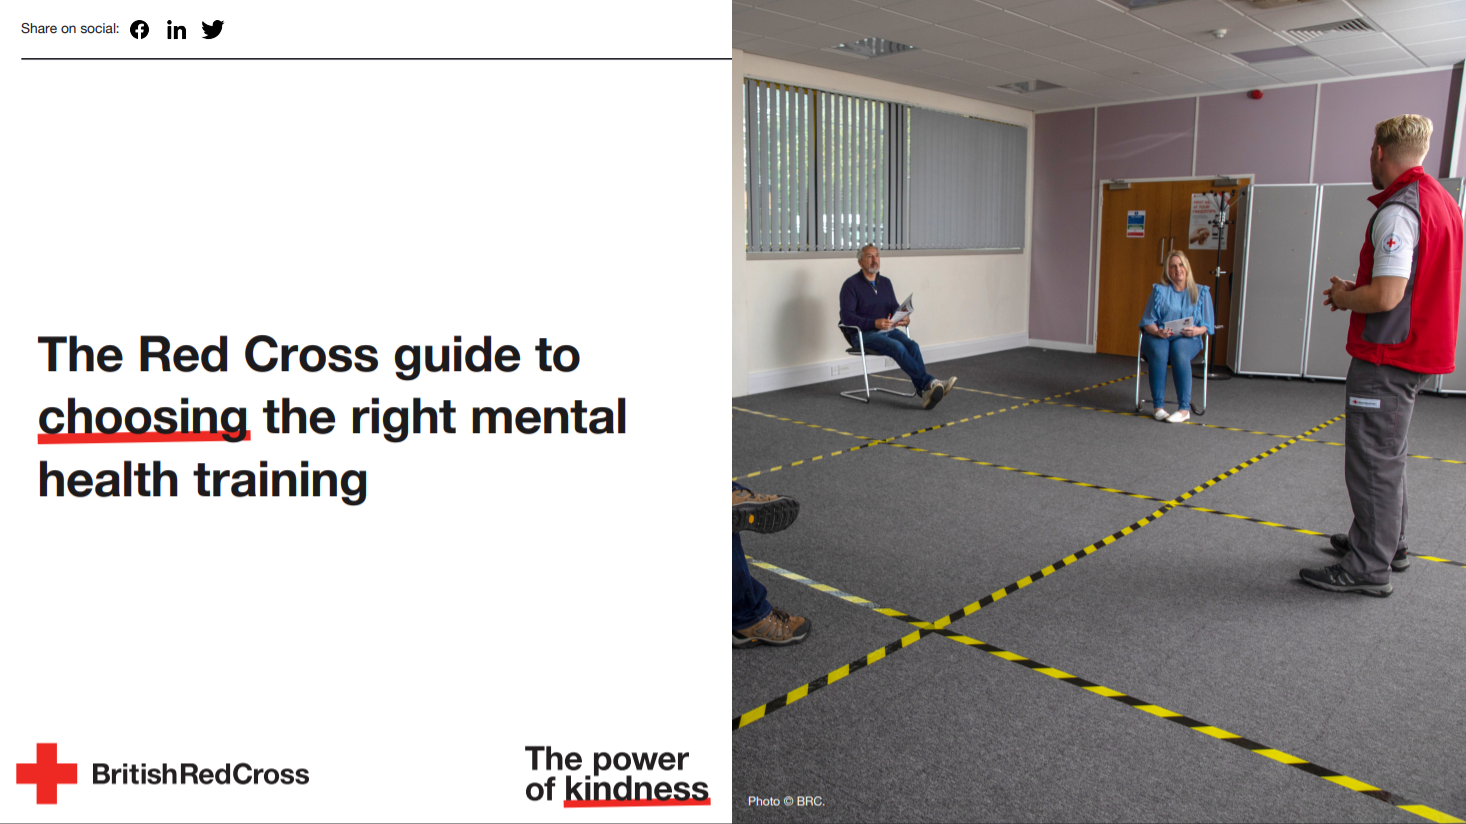 The Red Cross Guide to Choosing the Right Mental Health Training